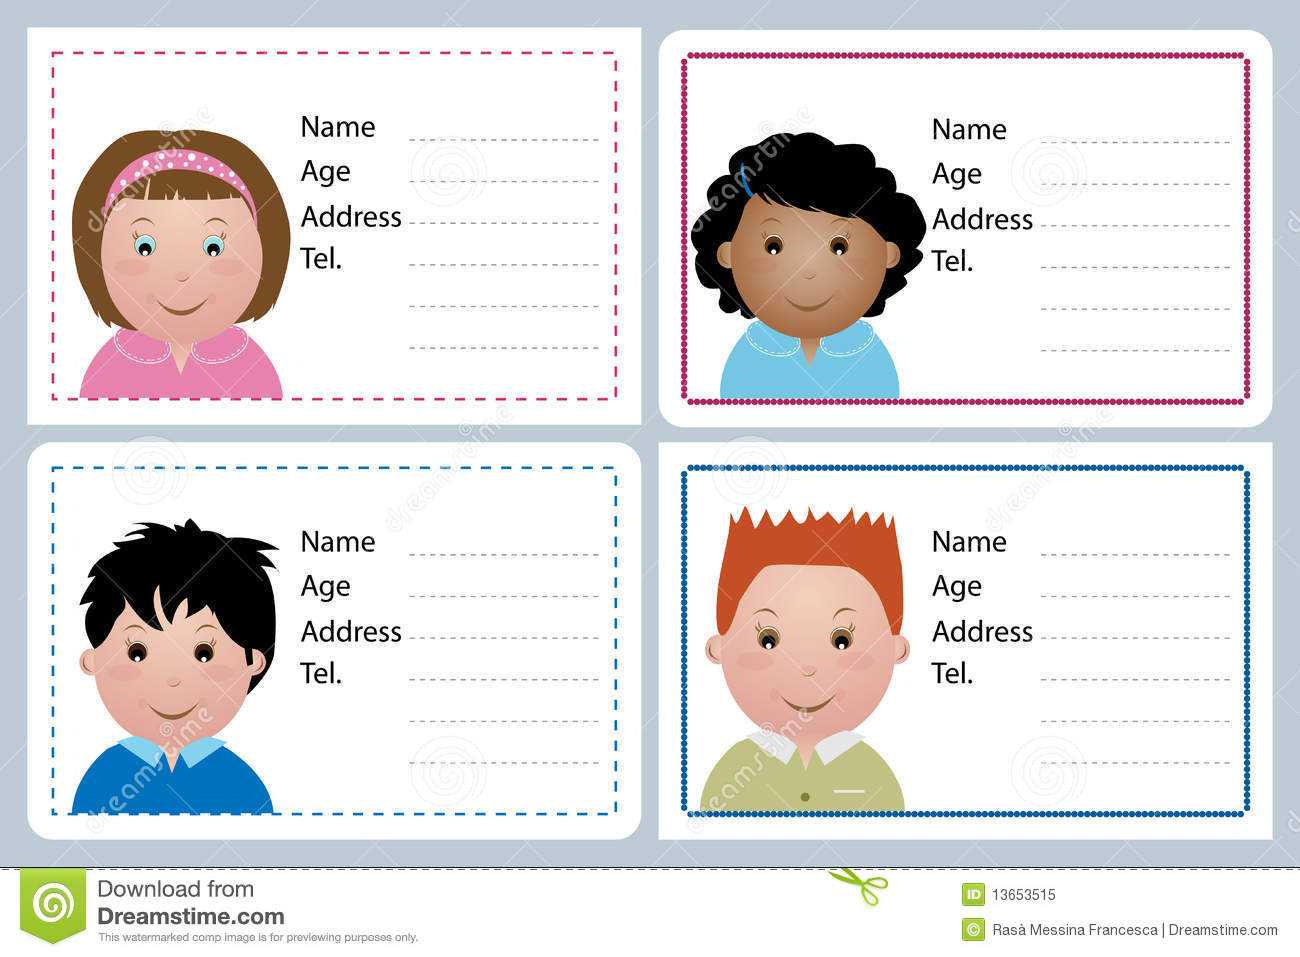 Children Name Card Stock Vector. Illustration Of Horizontal In Id Card Template For Kids